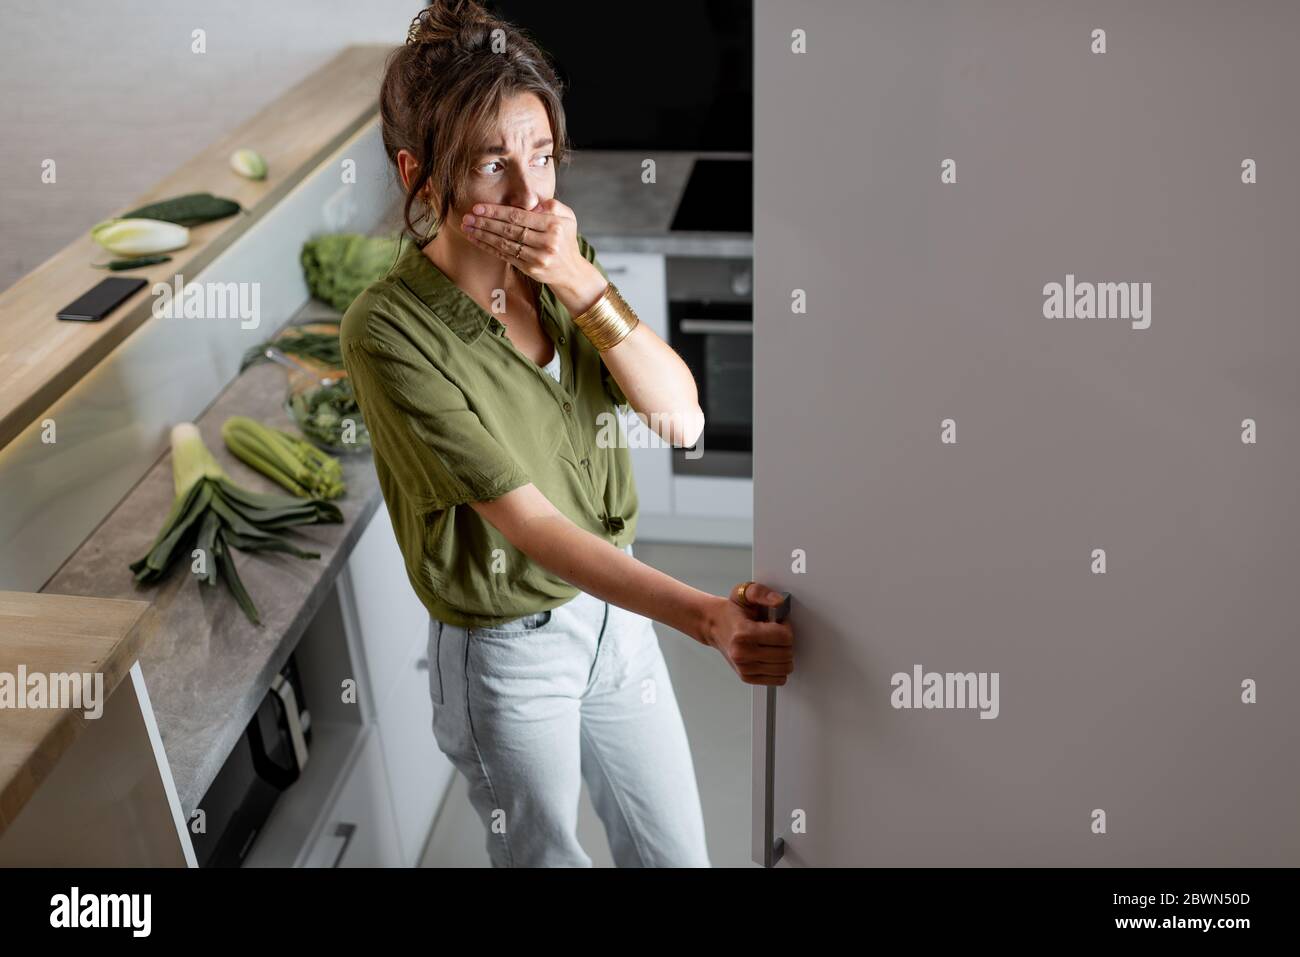 Young woman looking into the fridge, feeling hungry at night. Concept of not regular eating and overeating at night Stock Photo